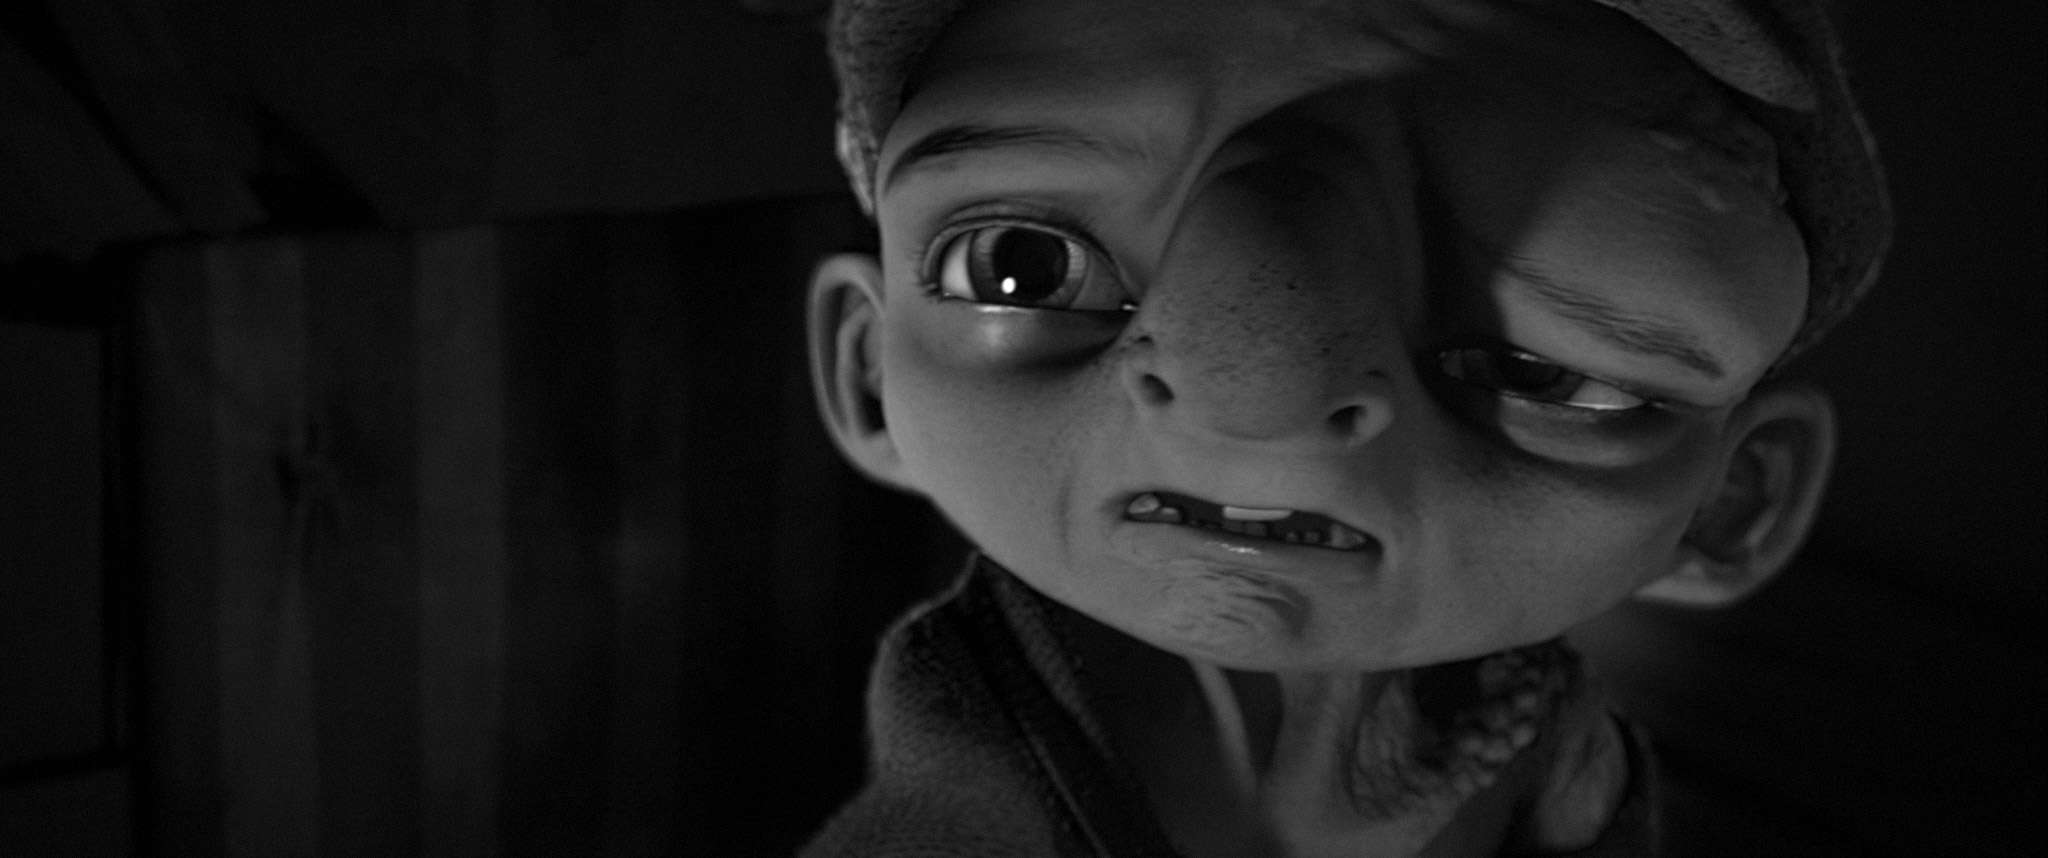 incredible-and-touching-animated-short-little-freak-9.jpg